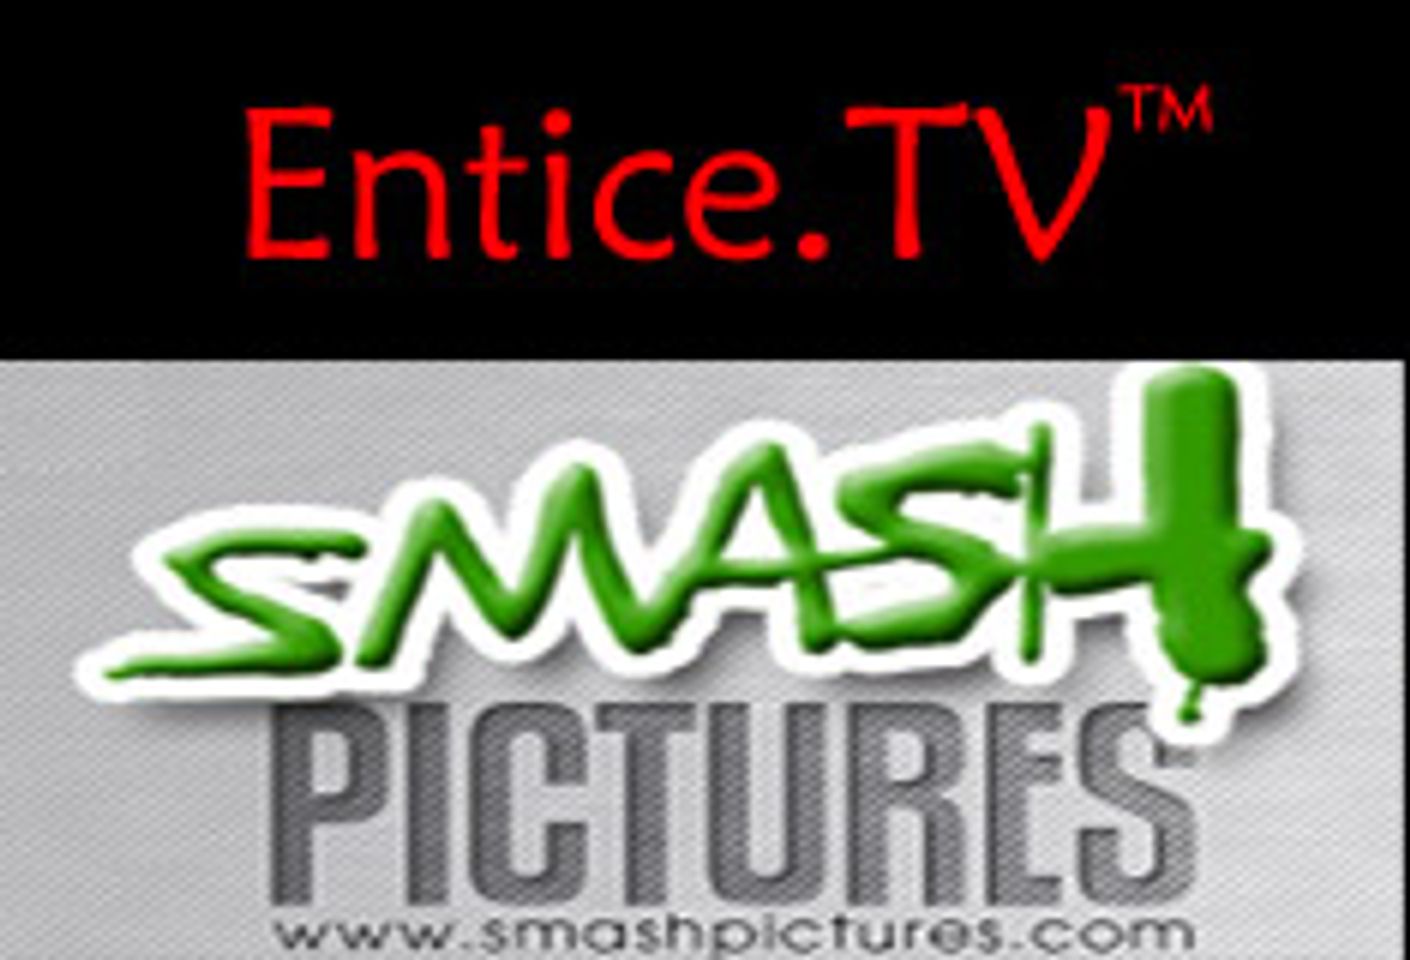 Smash Agrees to Pact with Entice.TV